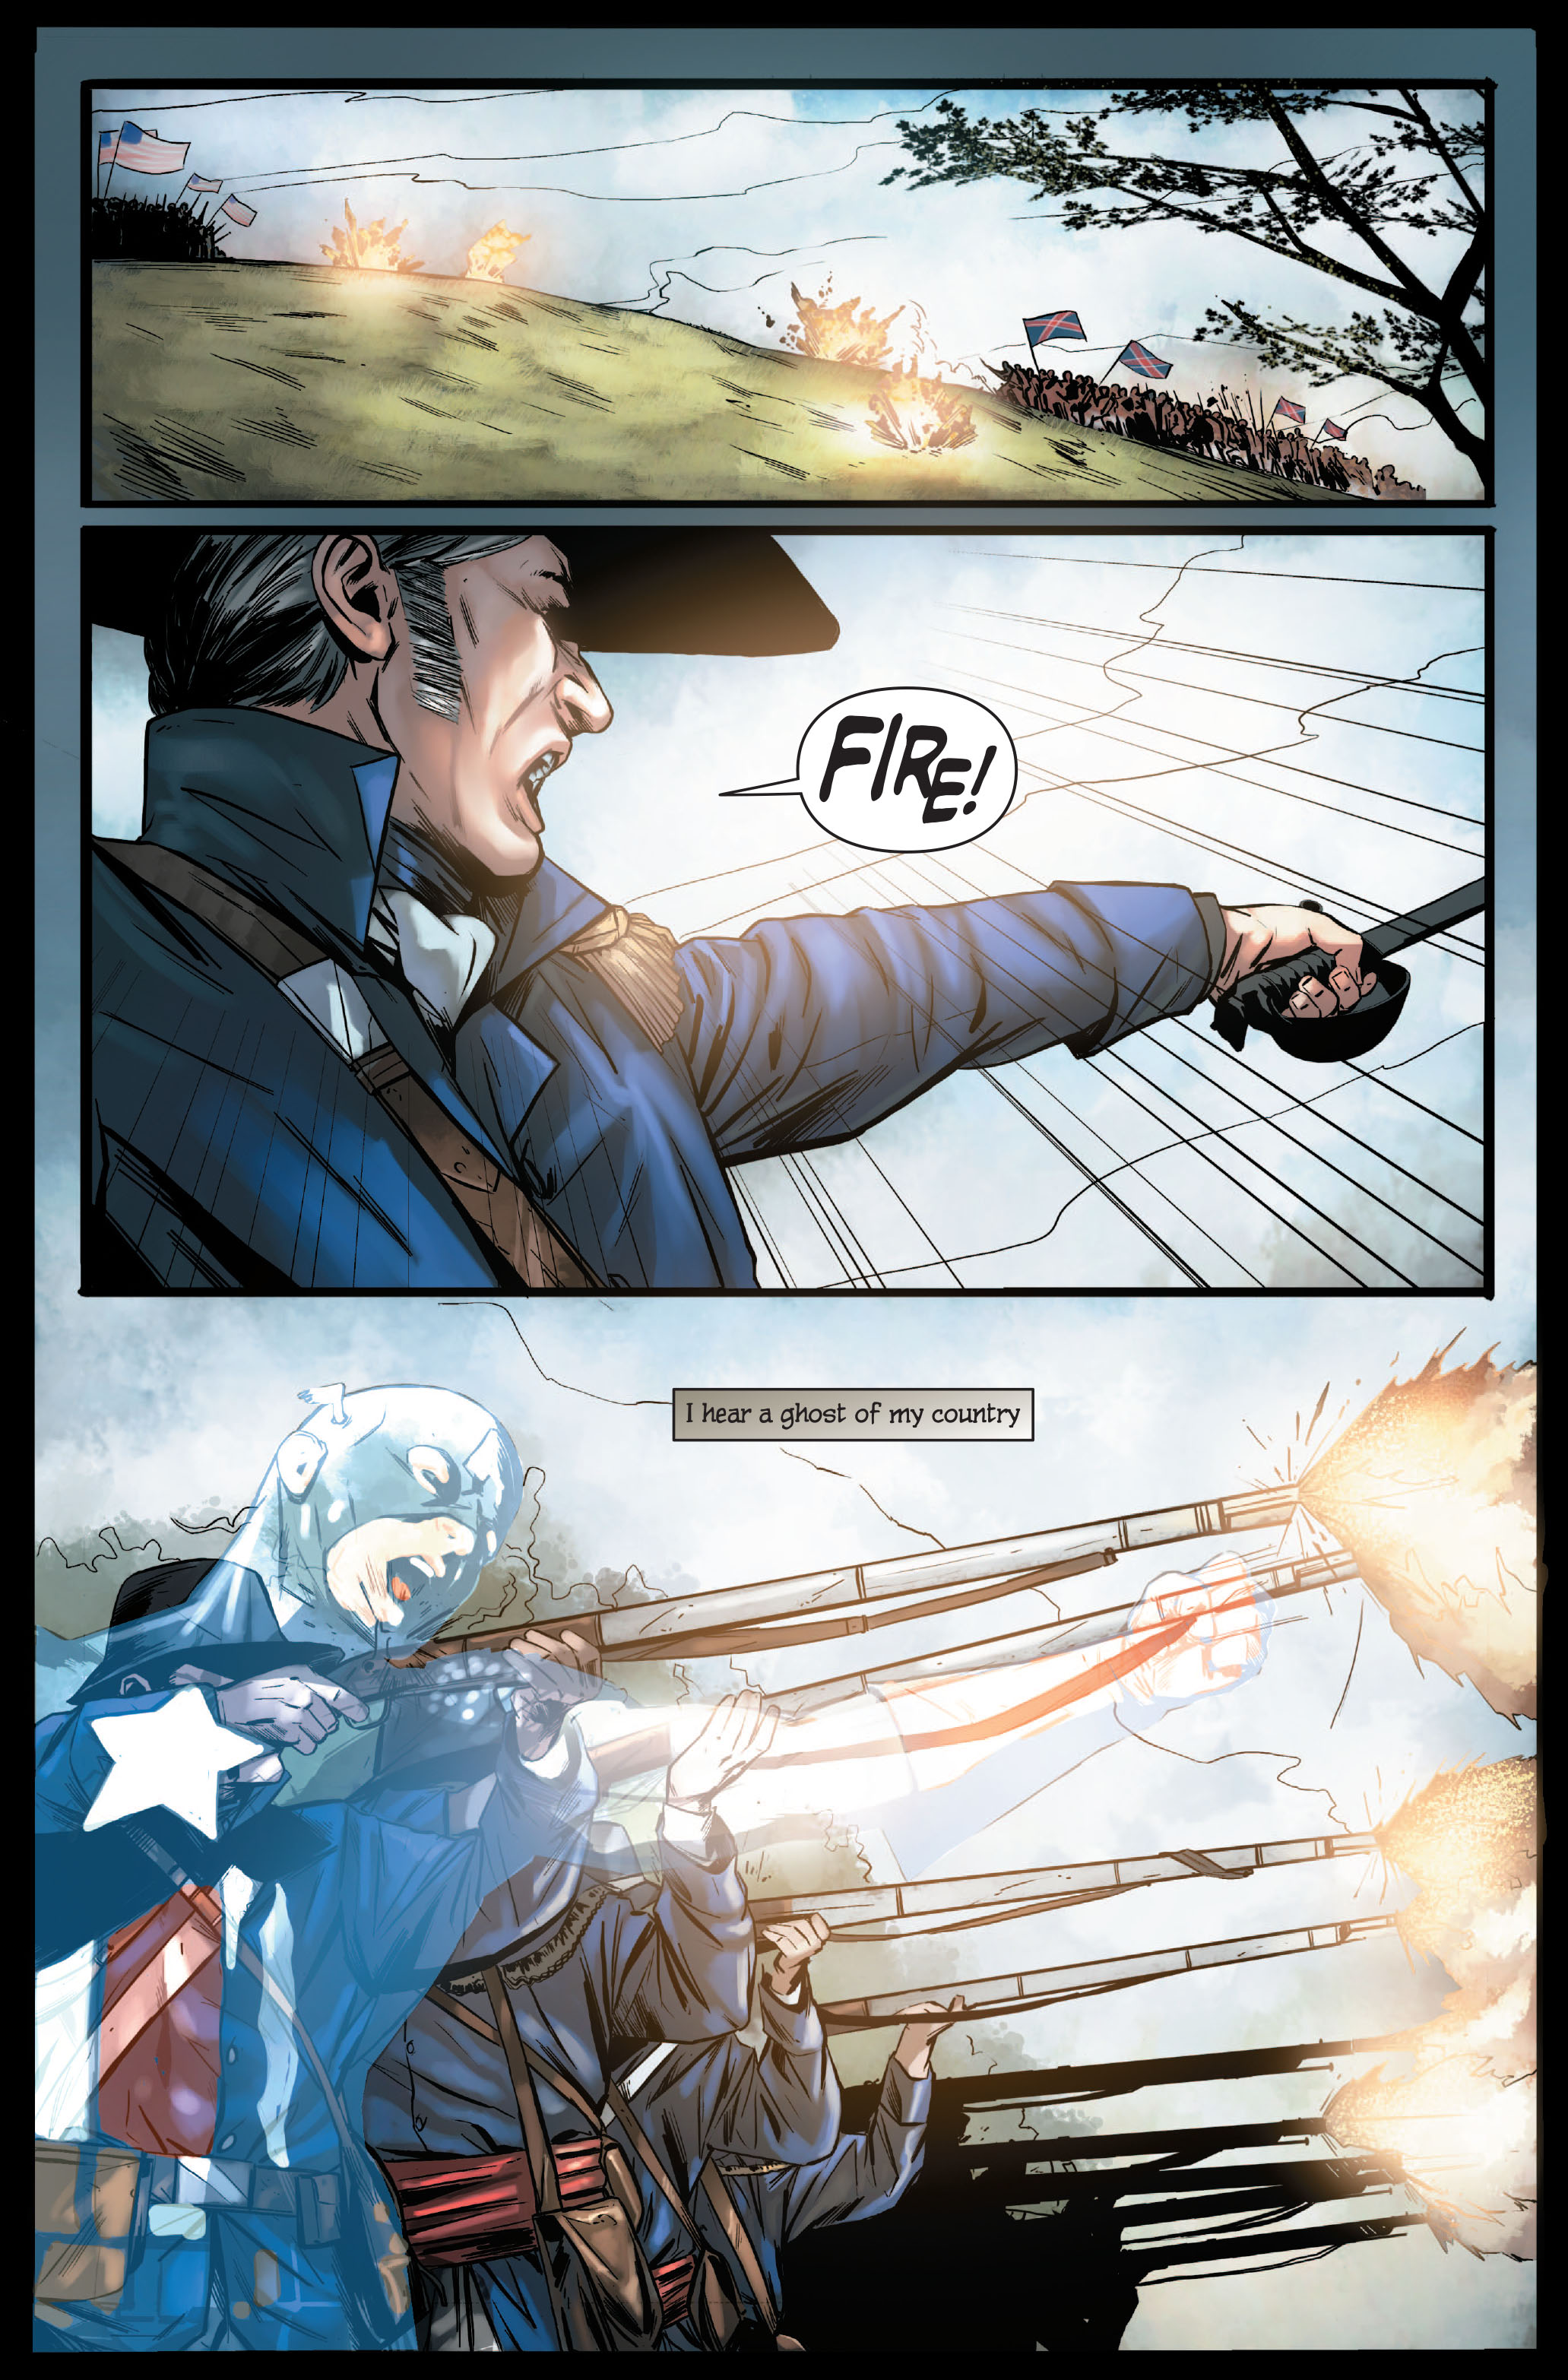 Captain America Theater of War: Ghosts of My Country Full Page 16